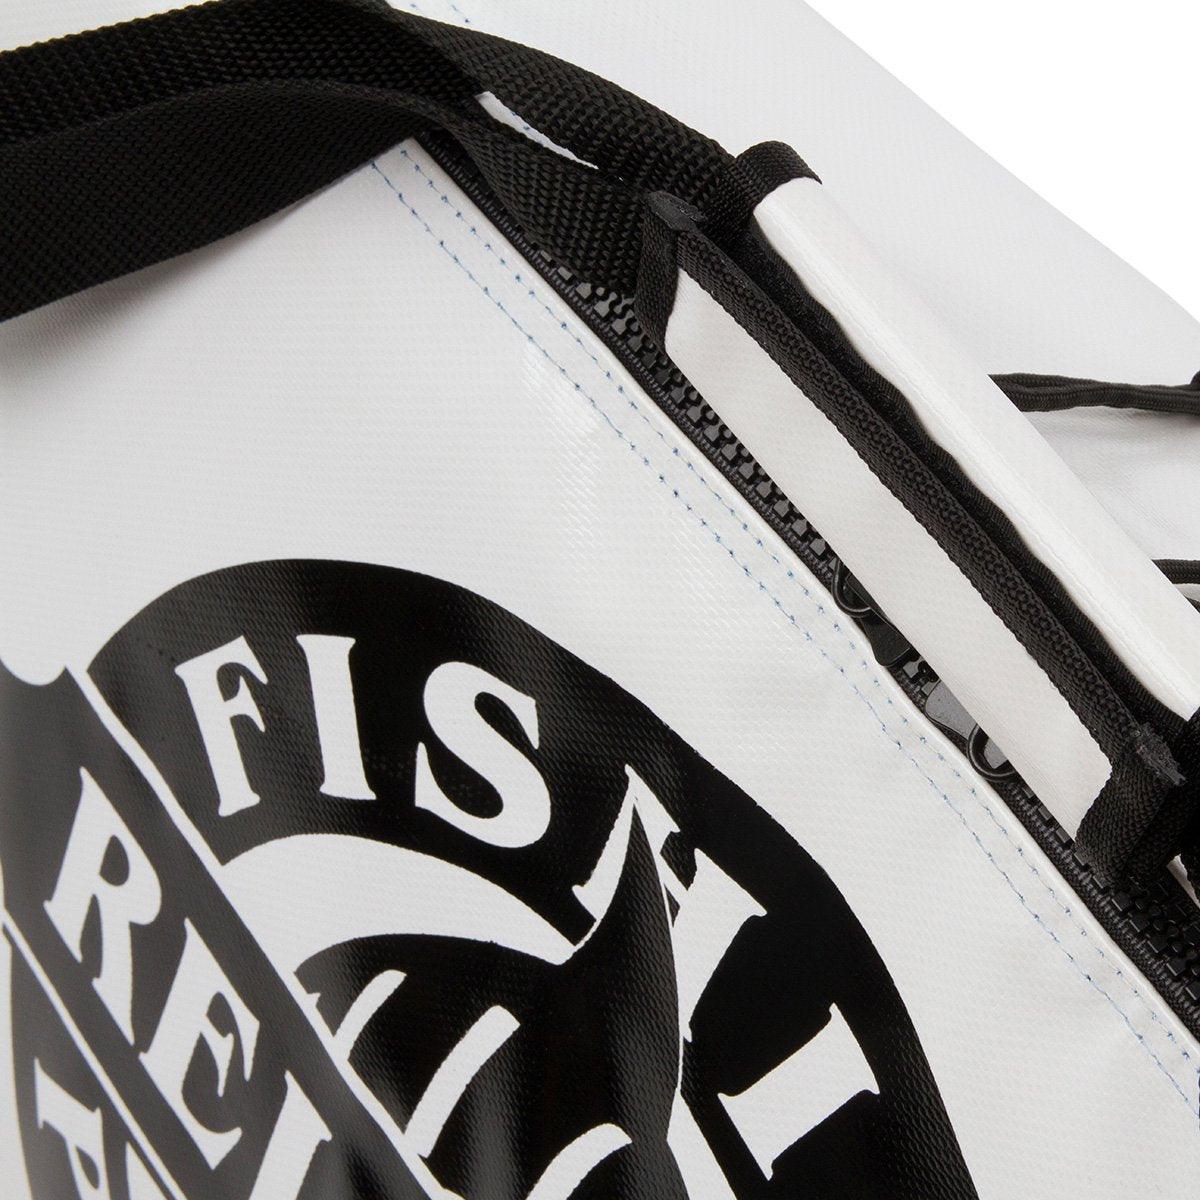 18" X 36" Insulated Kill Bag, Fresh Water Edition - RIPPING IT